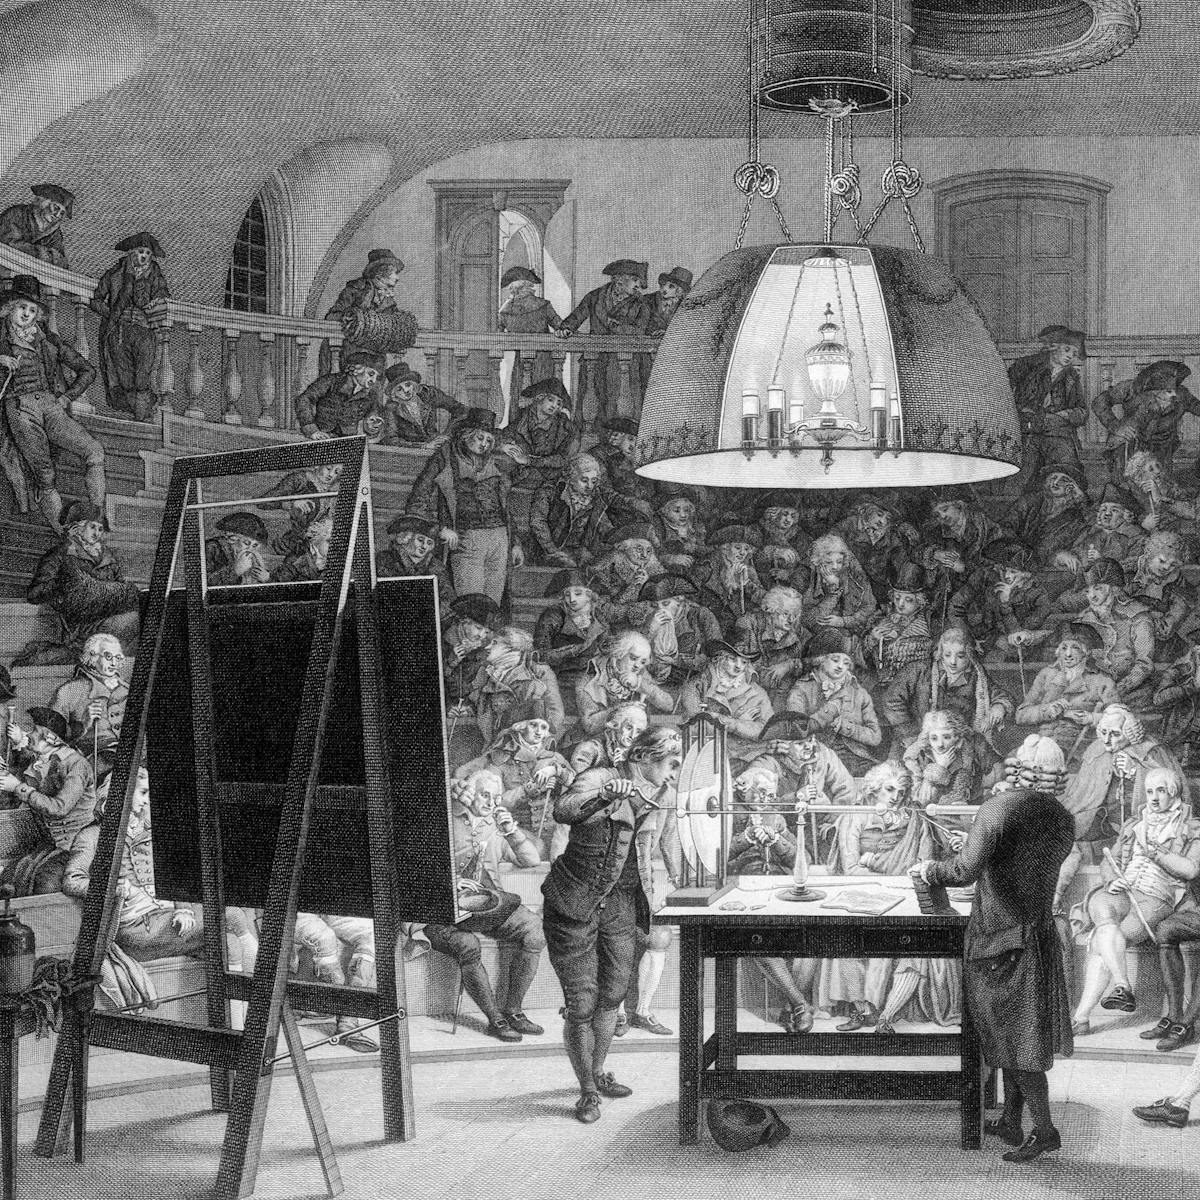 J H van Swinden demonstrating the generation of electricity to the Felix Meritis Society, Amsterdam. Engraving by R. Vinkeles after J. Kuyper and P. Barbiers.